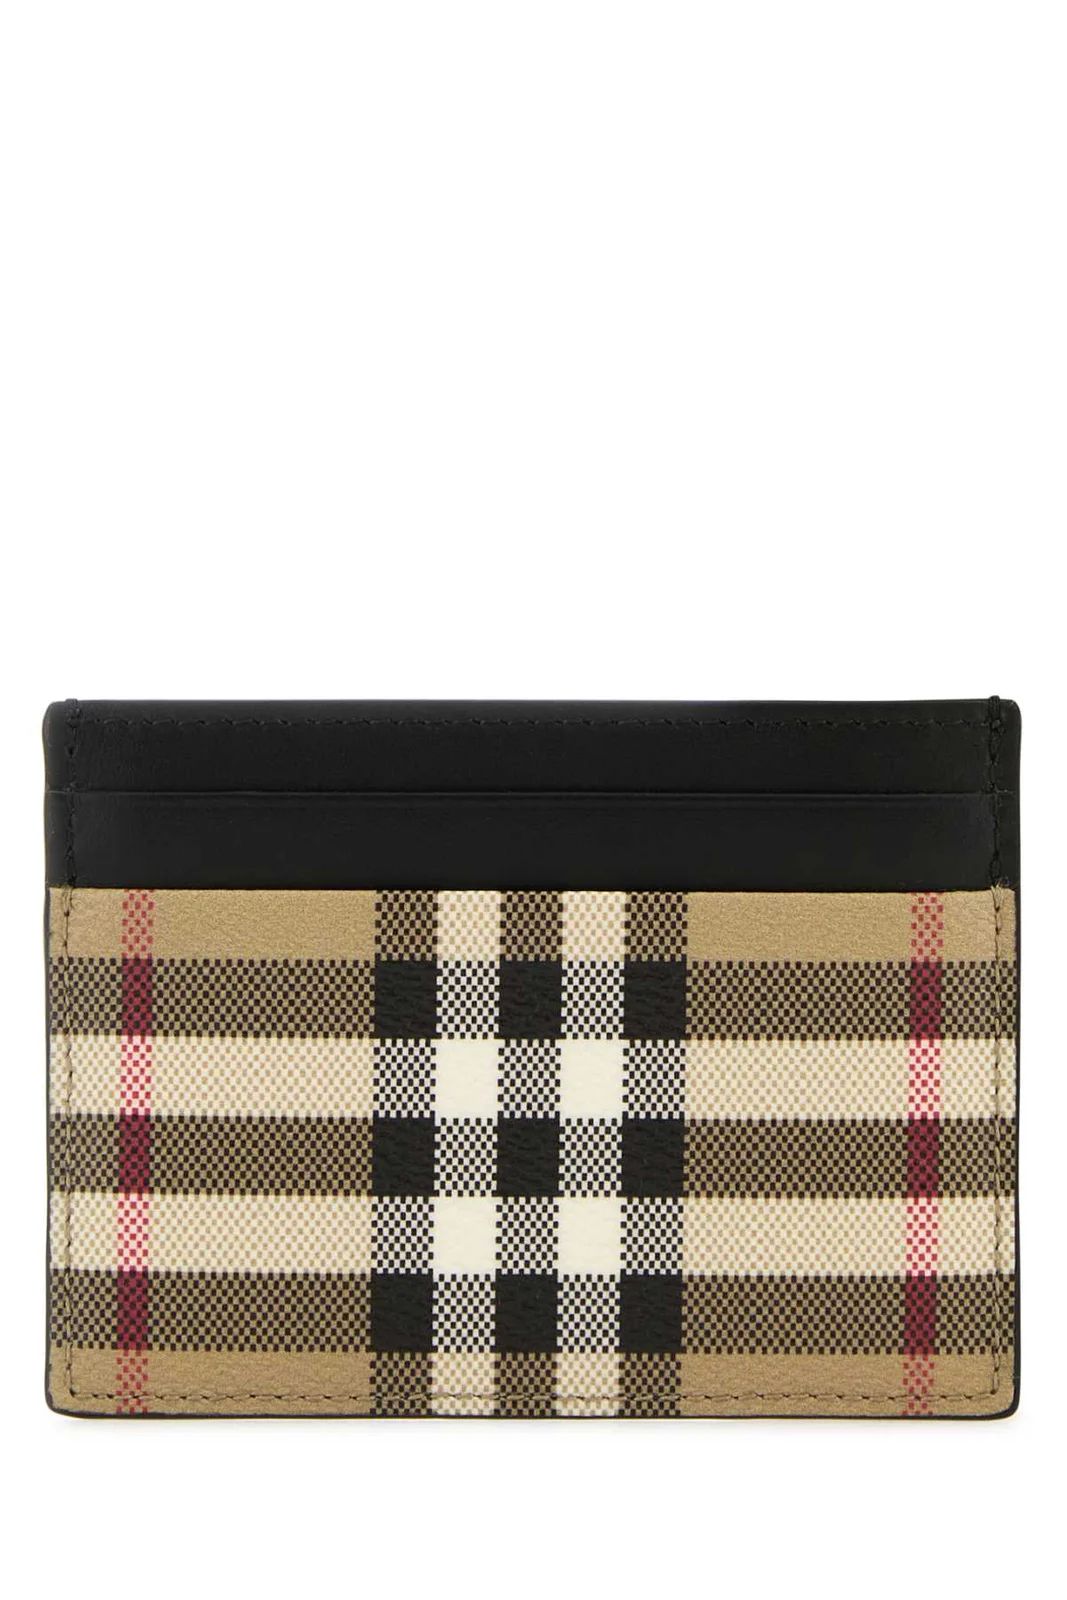 Burberry Checked Rectangular-Shaped Cardholder | Cettire Global